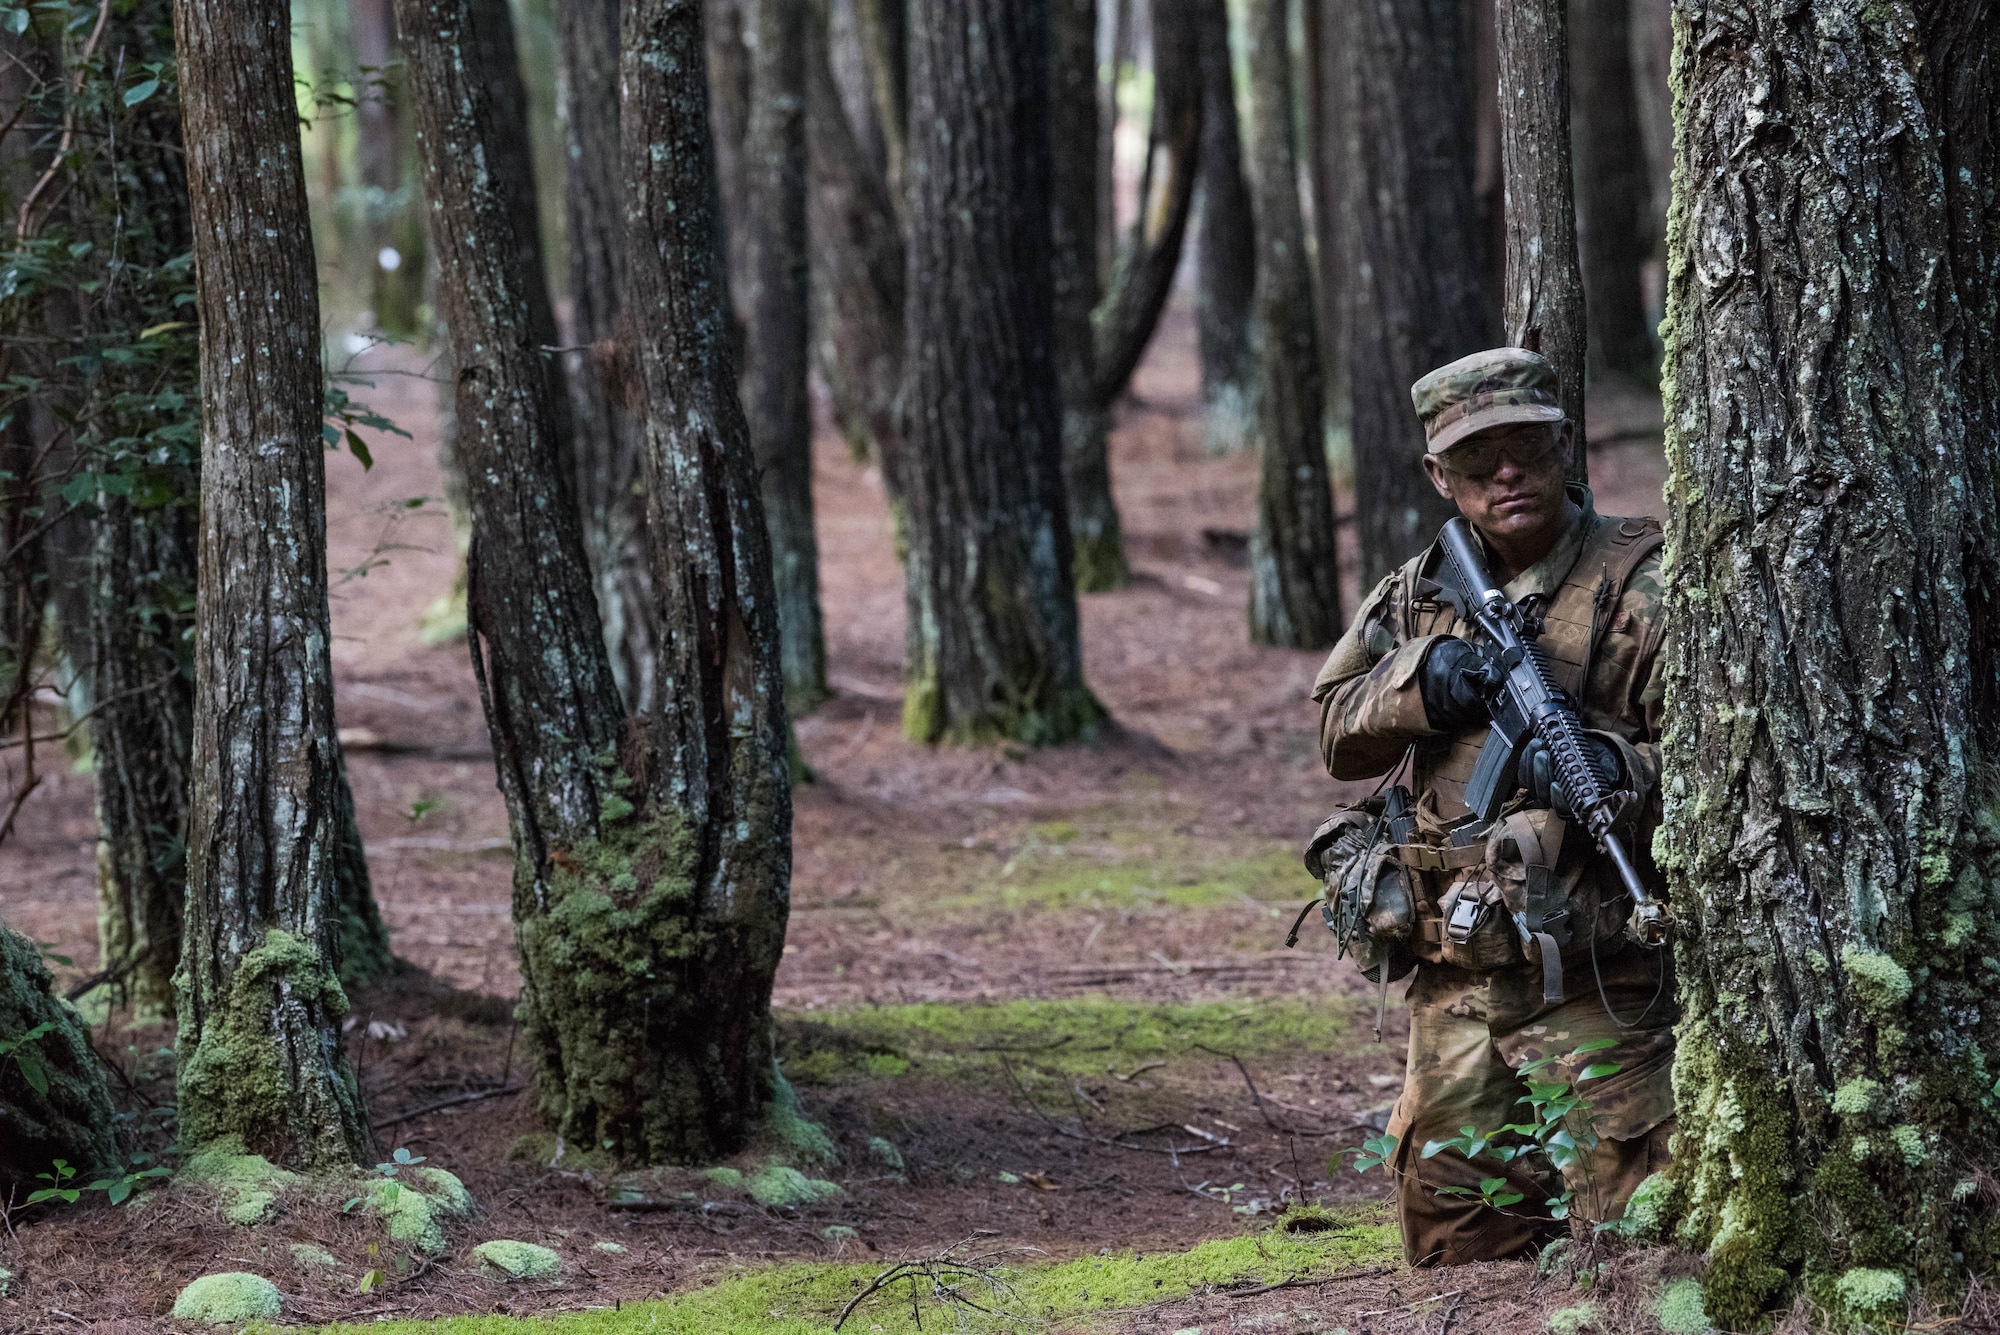 2nd Lt. Sam Good, Ranger Assessment Course student, simulates opposing forces during react to contact drill near Schofield Barracks, Oahu, Hawaii, May 23, 2019. Twenty-three Airmen from across the Air Force recently converged on a training camp for a three-week Ranger Assessment Course May 12-31, 2019. Throughout the course, Airmen were tested on their ability to perform land navigation, ambush, react to contact and squad attacks. Along with those assessments, the students went on runs and marches of different distances – all leading up to a 12-mile ruck march two days before graduation. (U.S. Air Force photo by Staff Sgt. Hailey Haux)